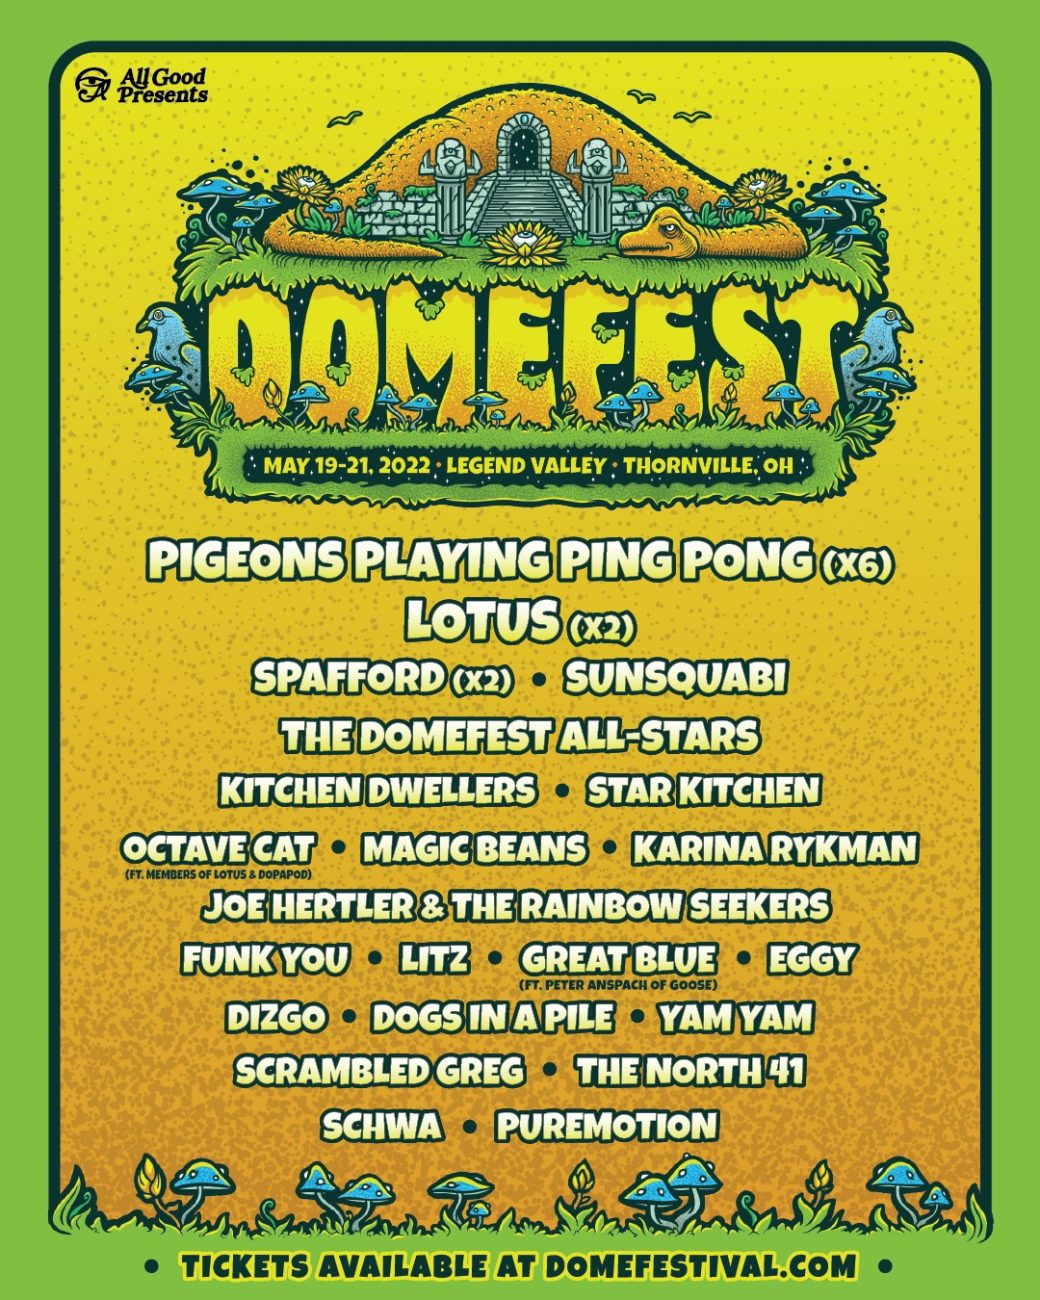 Domefest lineup announced